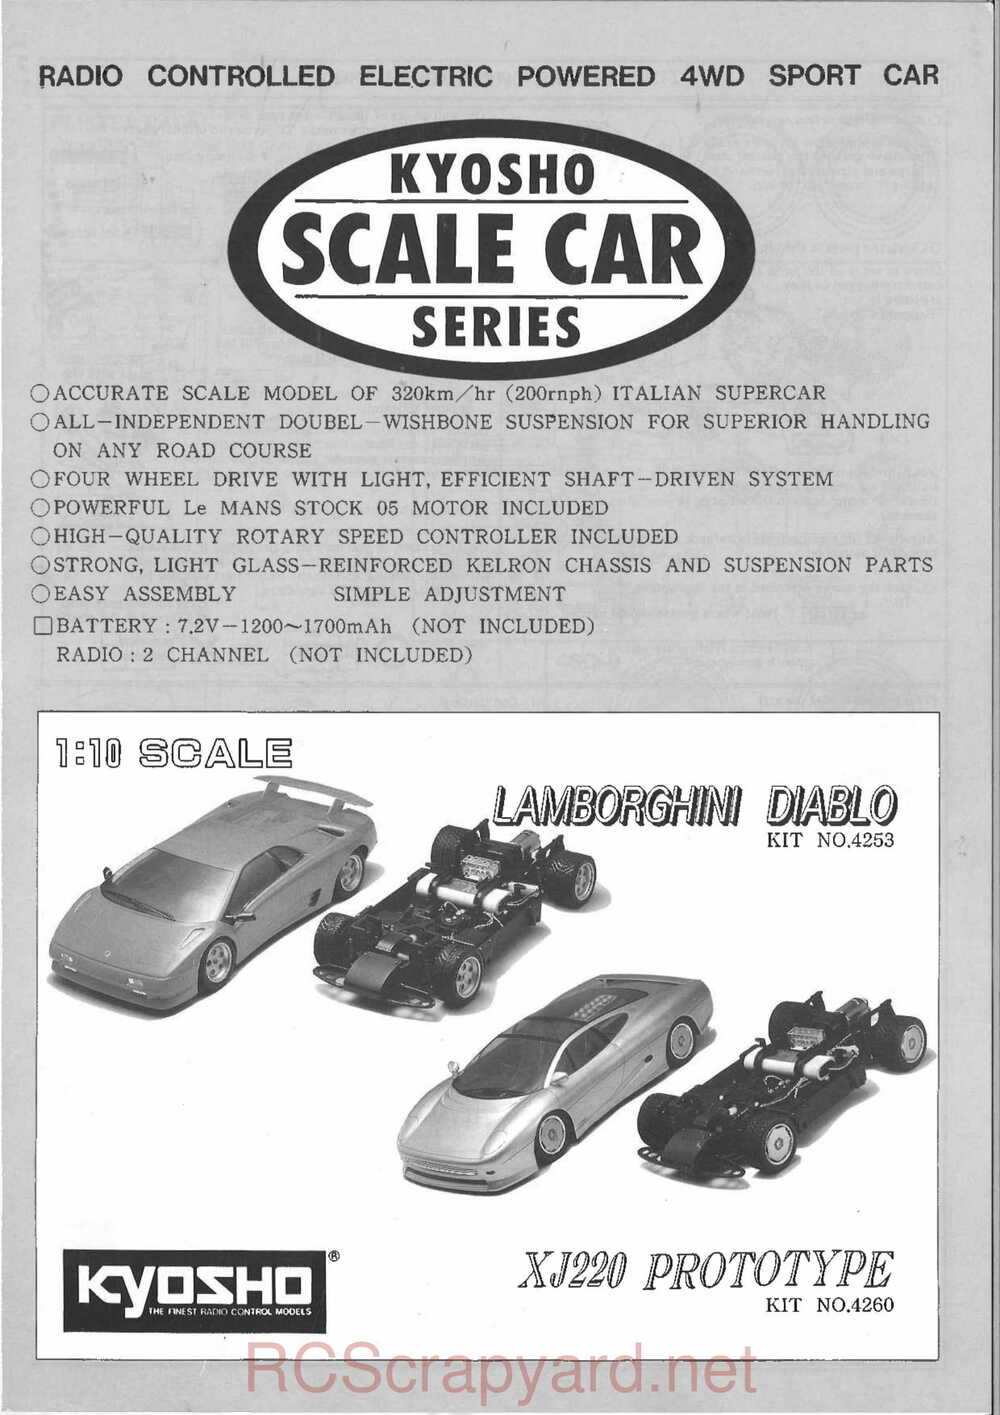 Kyosho - 4253 4260 - Scale-Car-Series - Manual - Page 01